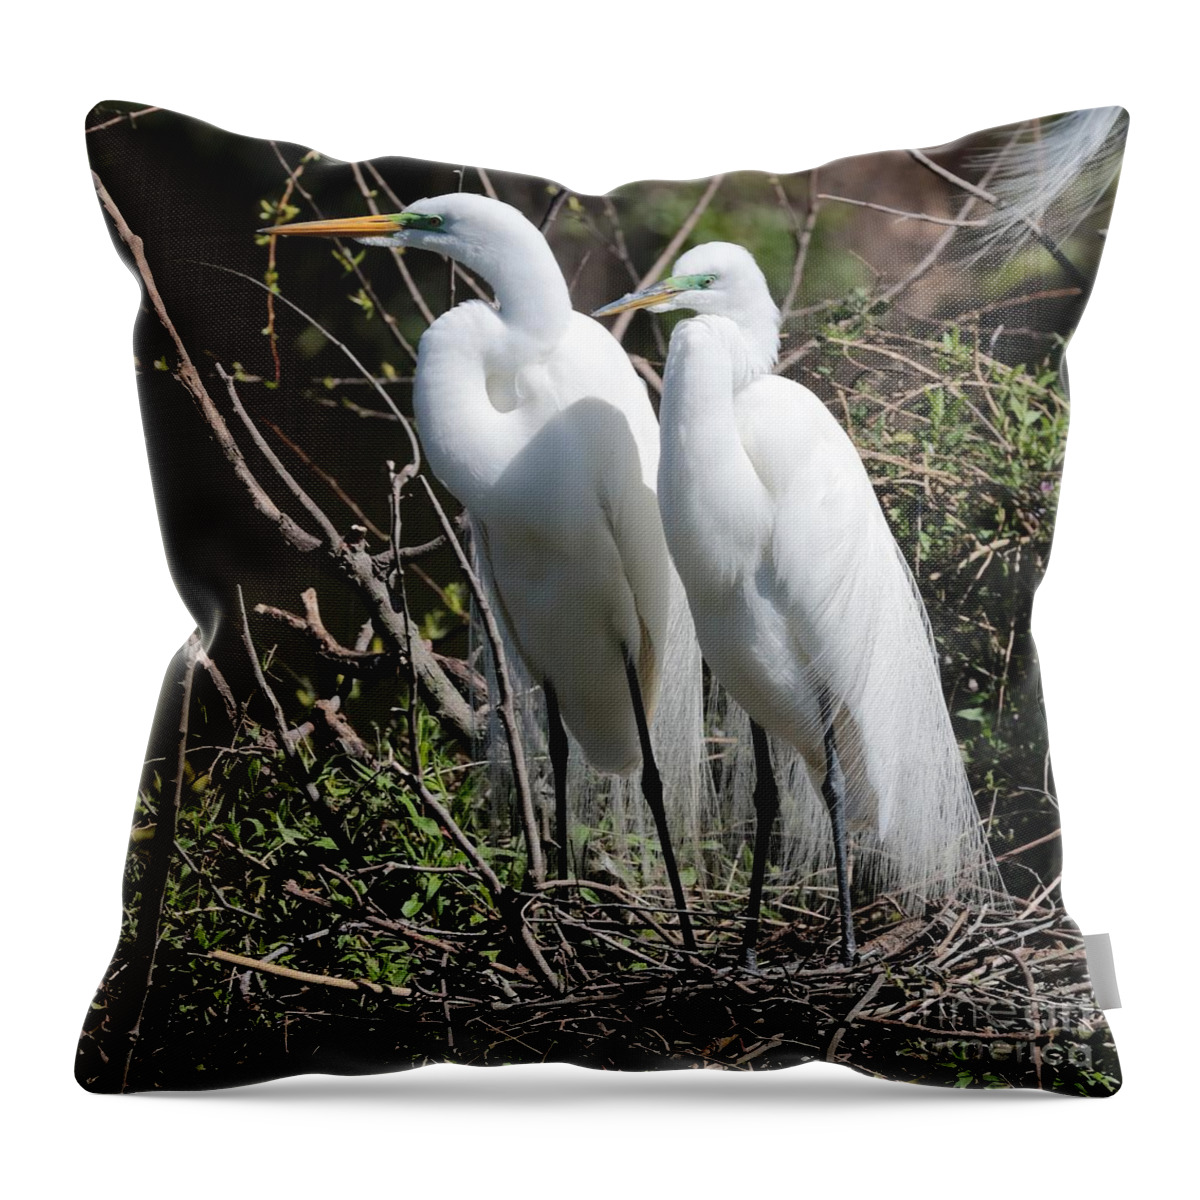 Egret Throw Pillow featuring the photograph Handsome Egret Couple by Carol Groenen